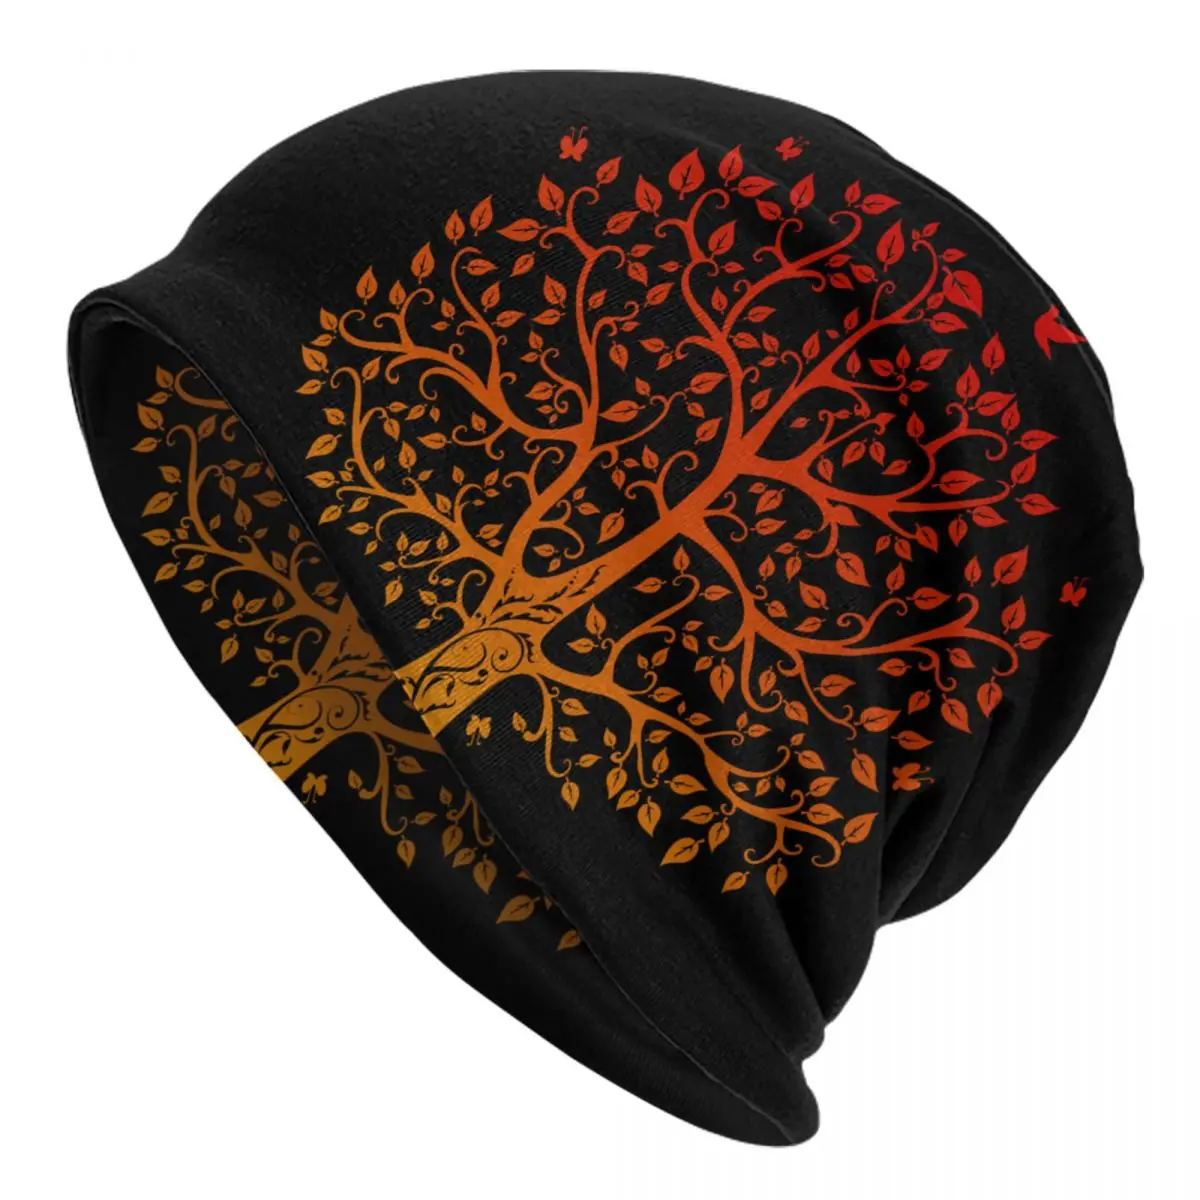 Tree Of Life Adult Men's Women's Knit Hat Keep warm winter Funny knitted hat